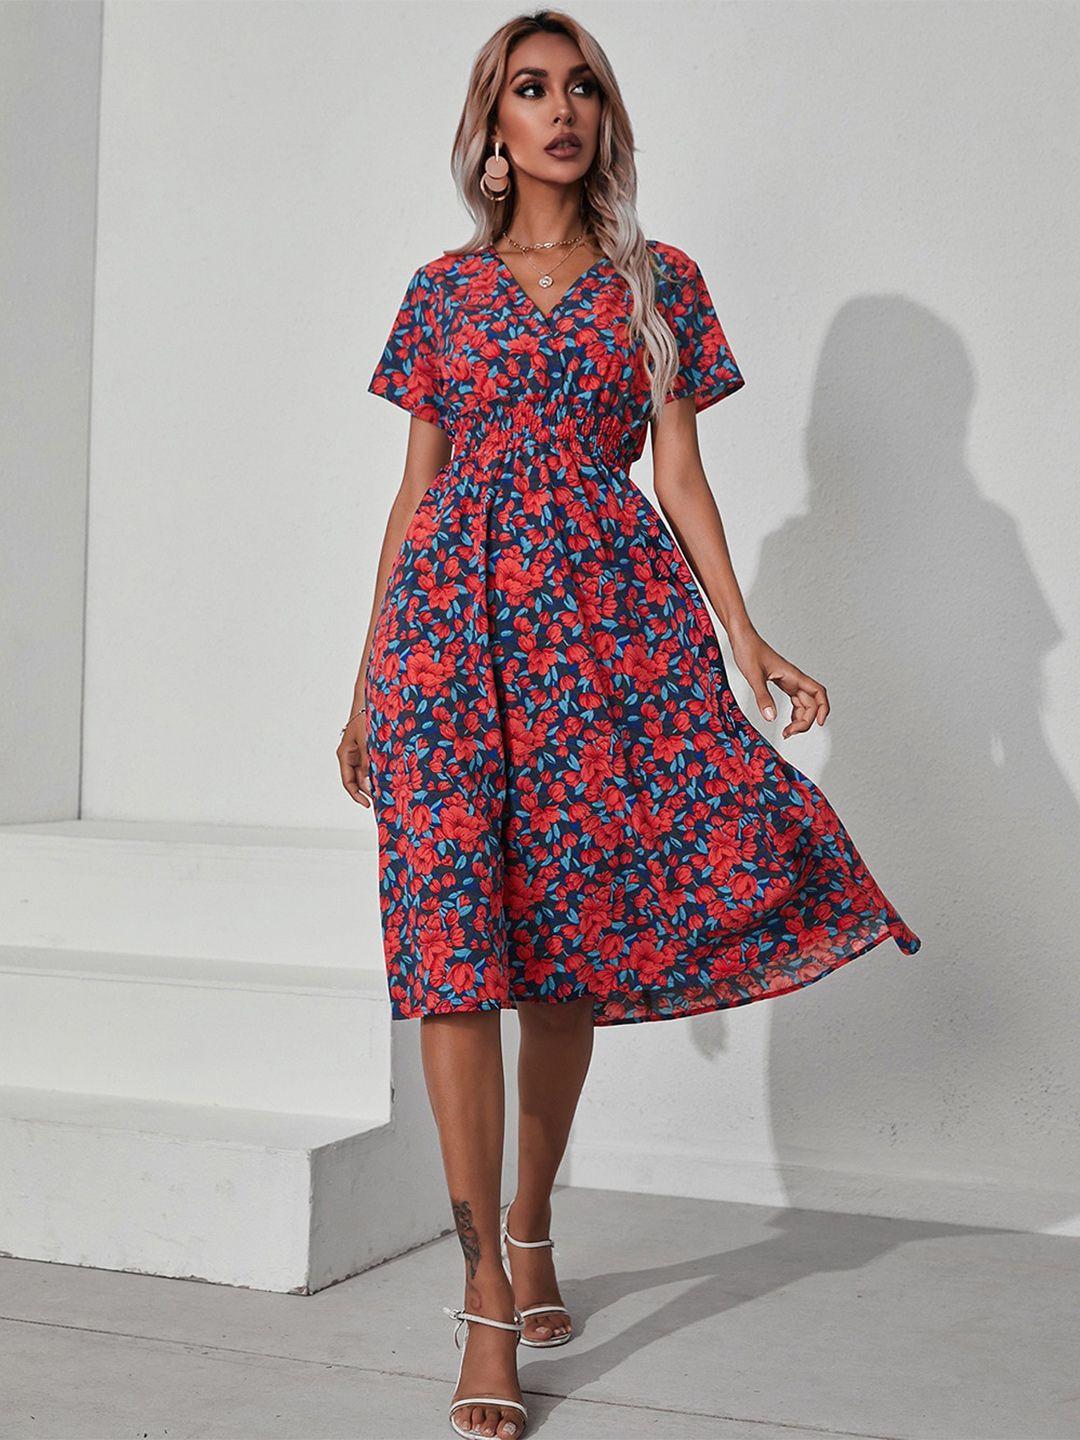 stylecast floral print fit & flare short sleeves midi dress